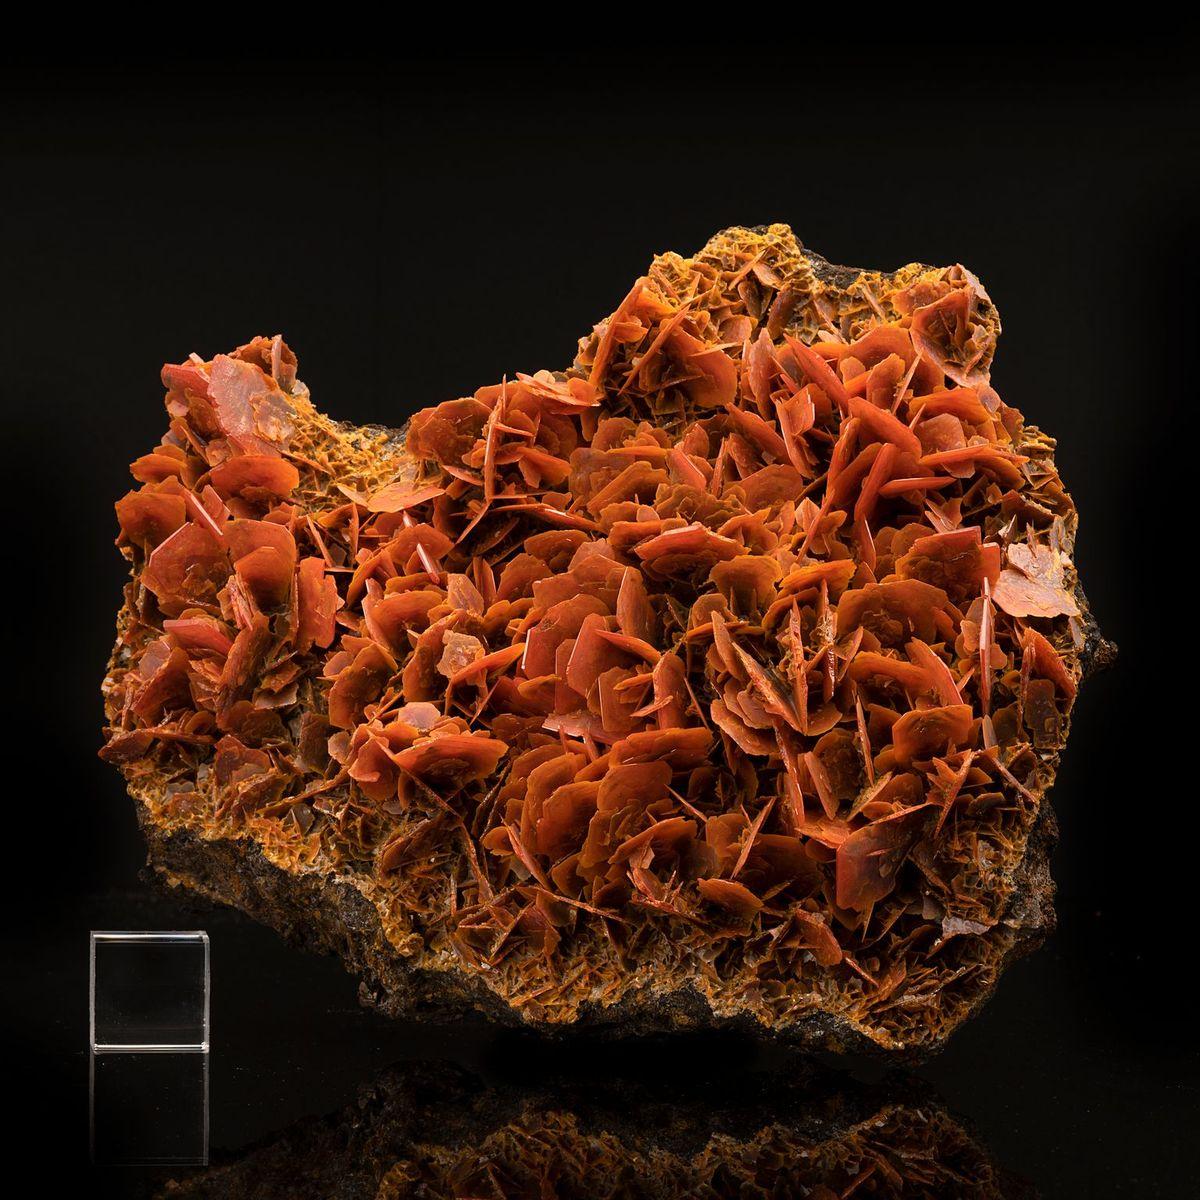 This delicate and arresting display of wulfenite out of China appears almost floral with burnt orange to yellow rosebud-like arrangements on a rocky matrix. An eye-popping acquisition to add color and texture to any serious collection.

Dimensions: